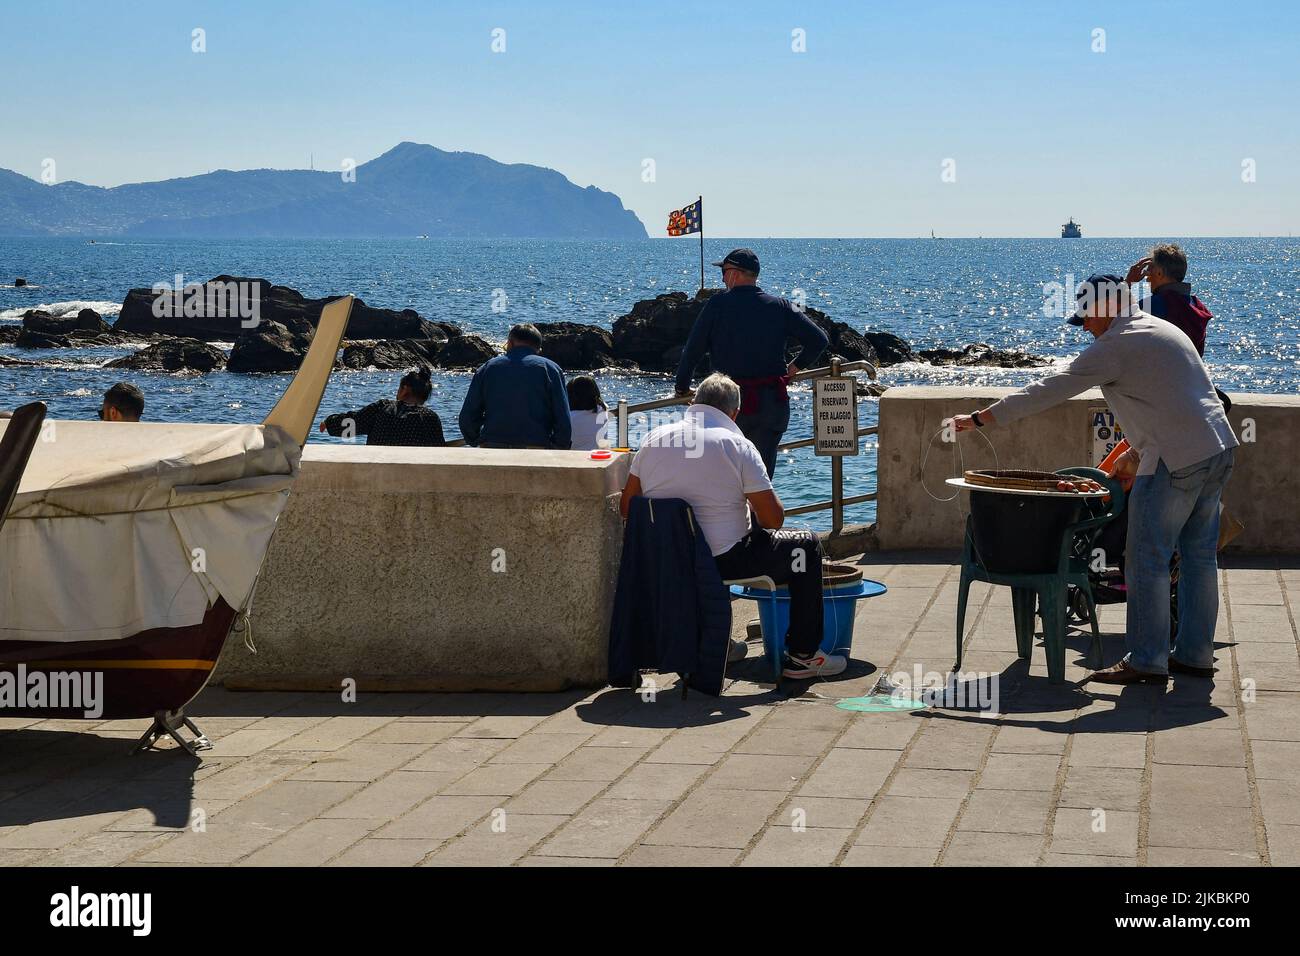 Fishermen repairing fishing nets on the waterfront of the seaside village with the promontory of Portofino in the background, Boccadasse, Genoa Stock Photo